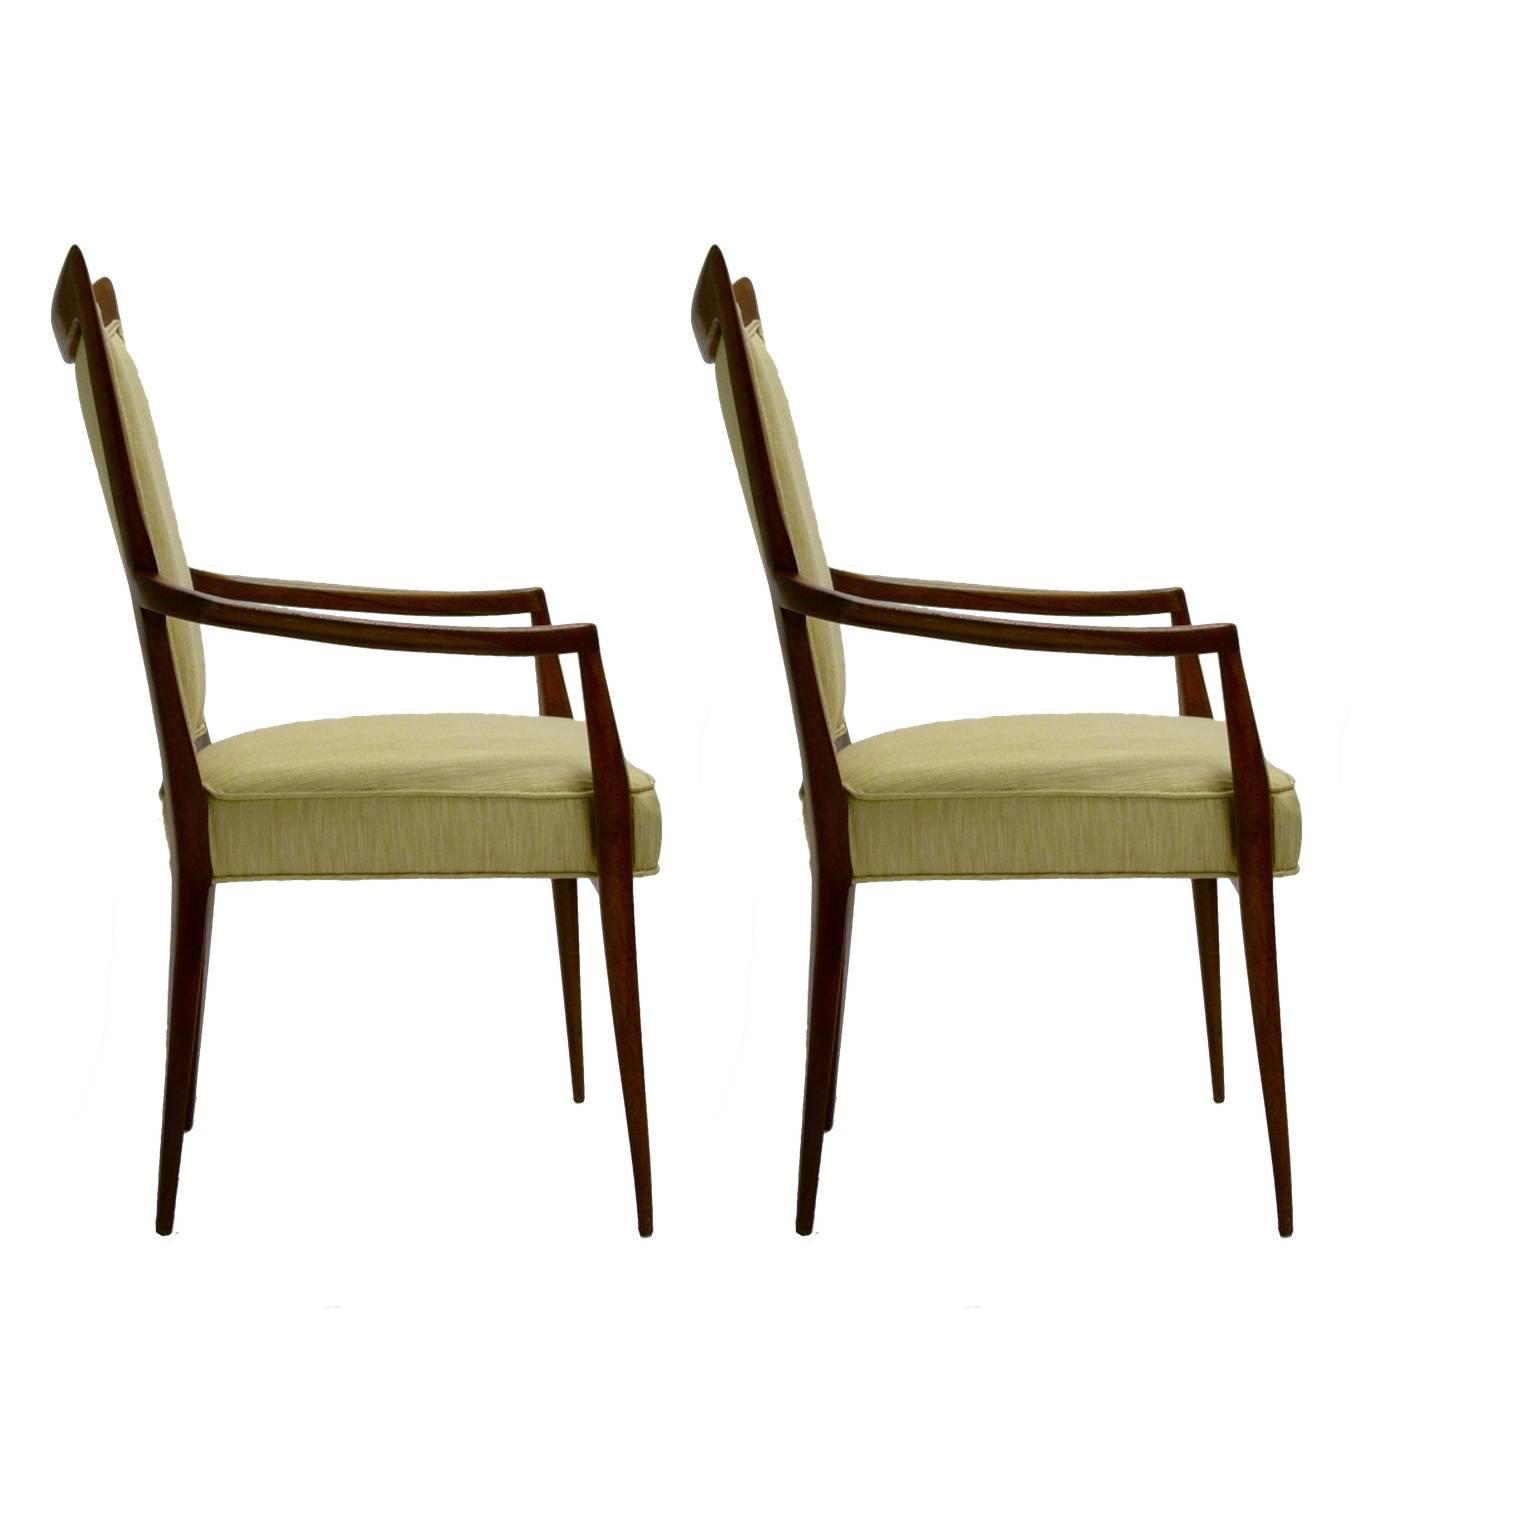 Stunning Pair of Sculptural Mahogany and Silk Chairs by Melchiorre Bega 1